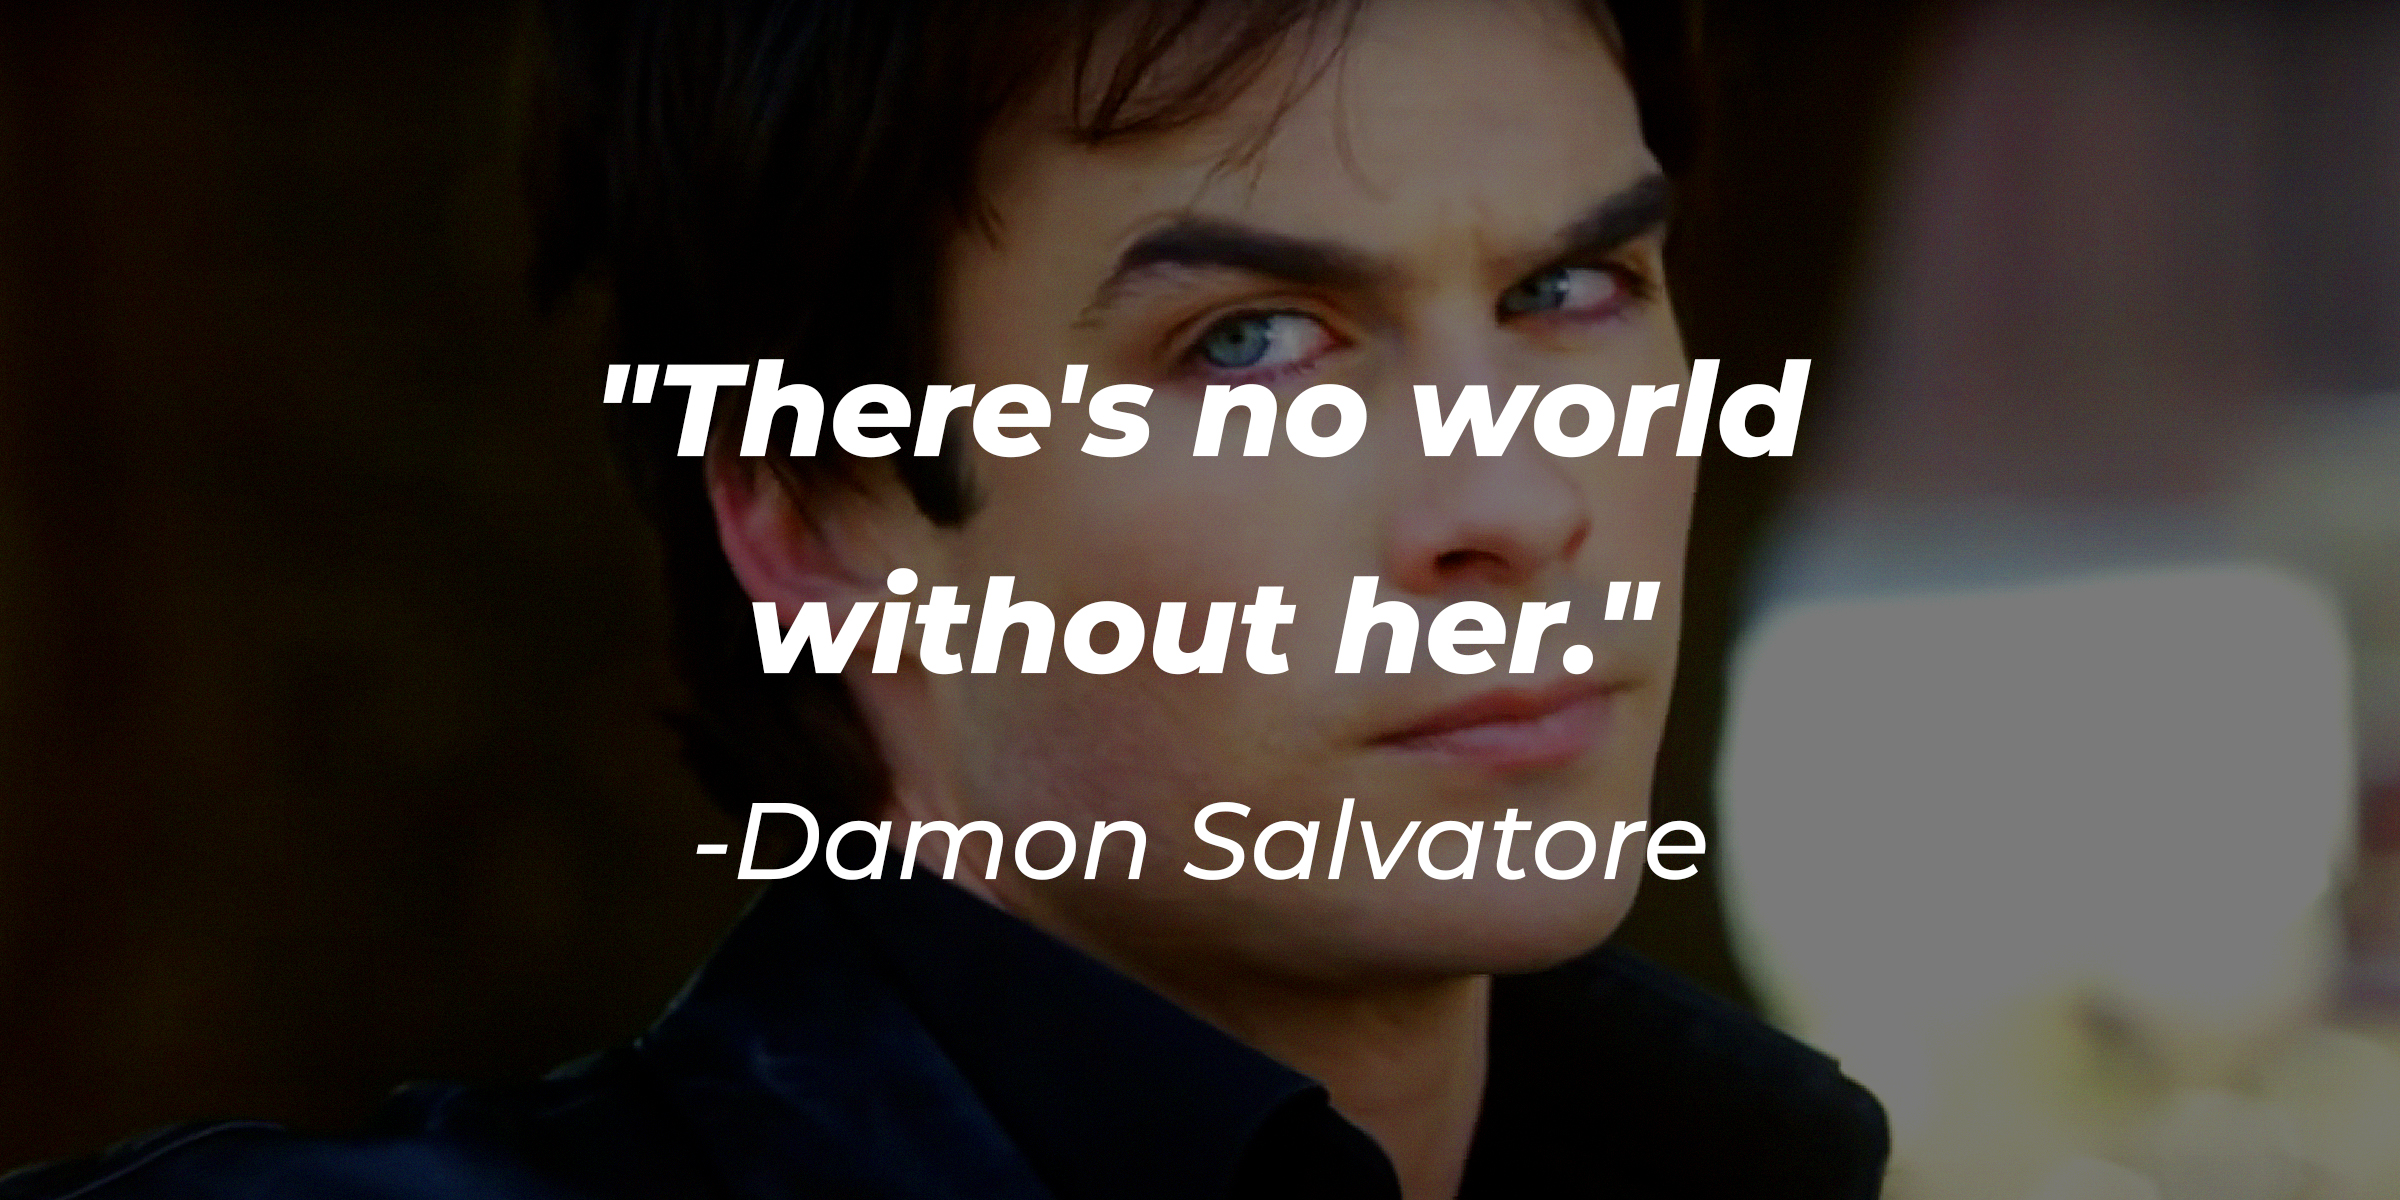 Damon Salvatore's quote: "There's no world without her." | Source: Facebook.com/thevampirediaries